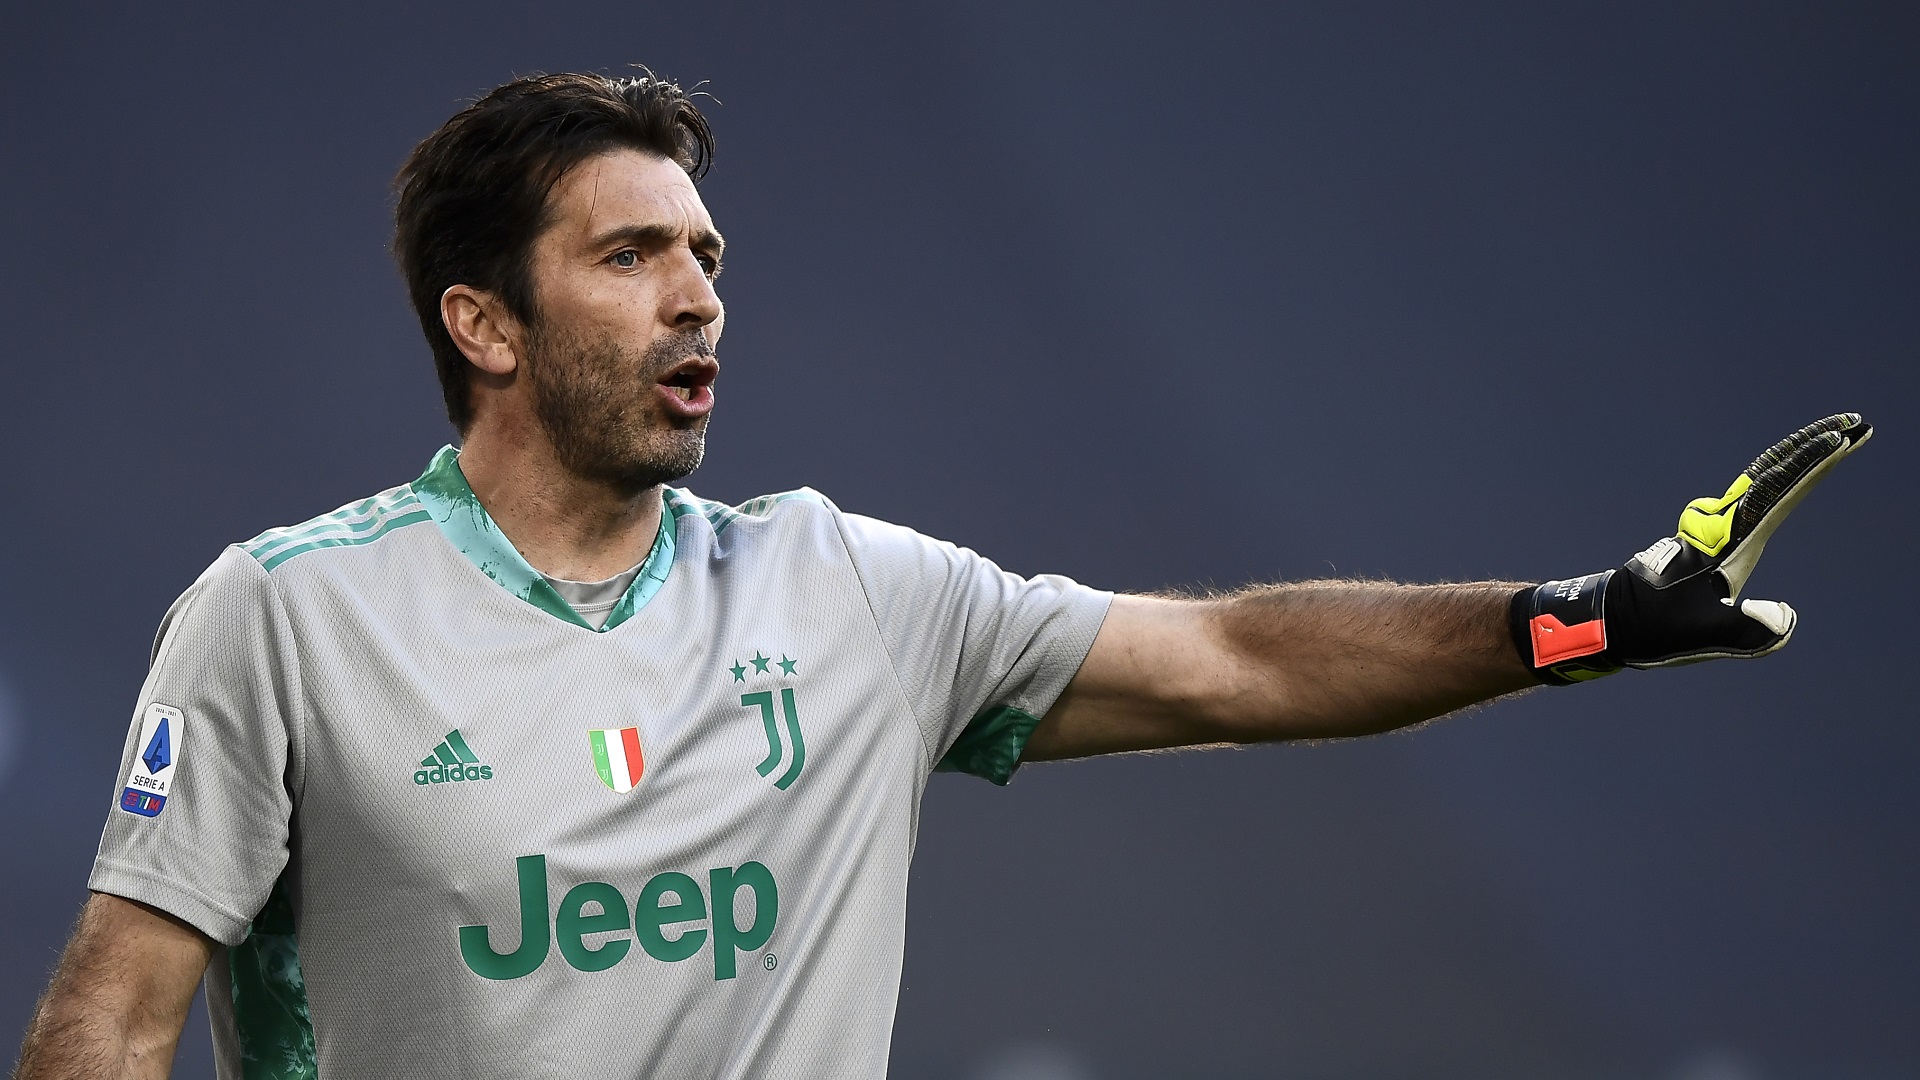 Azzurri icon Buffon, widely recognized as one of the greatest goalkeepers of all time, retires at 45, following 28 years of service at the highest level.